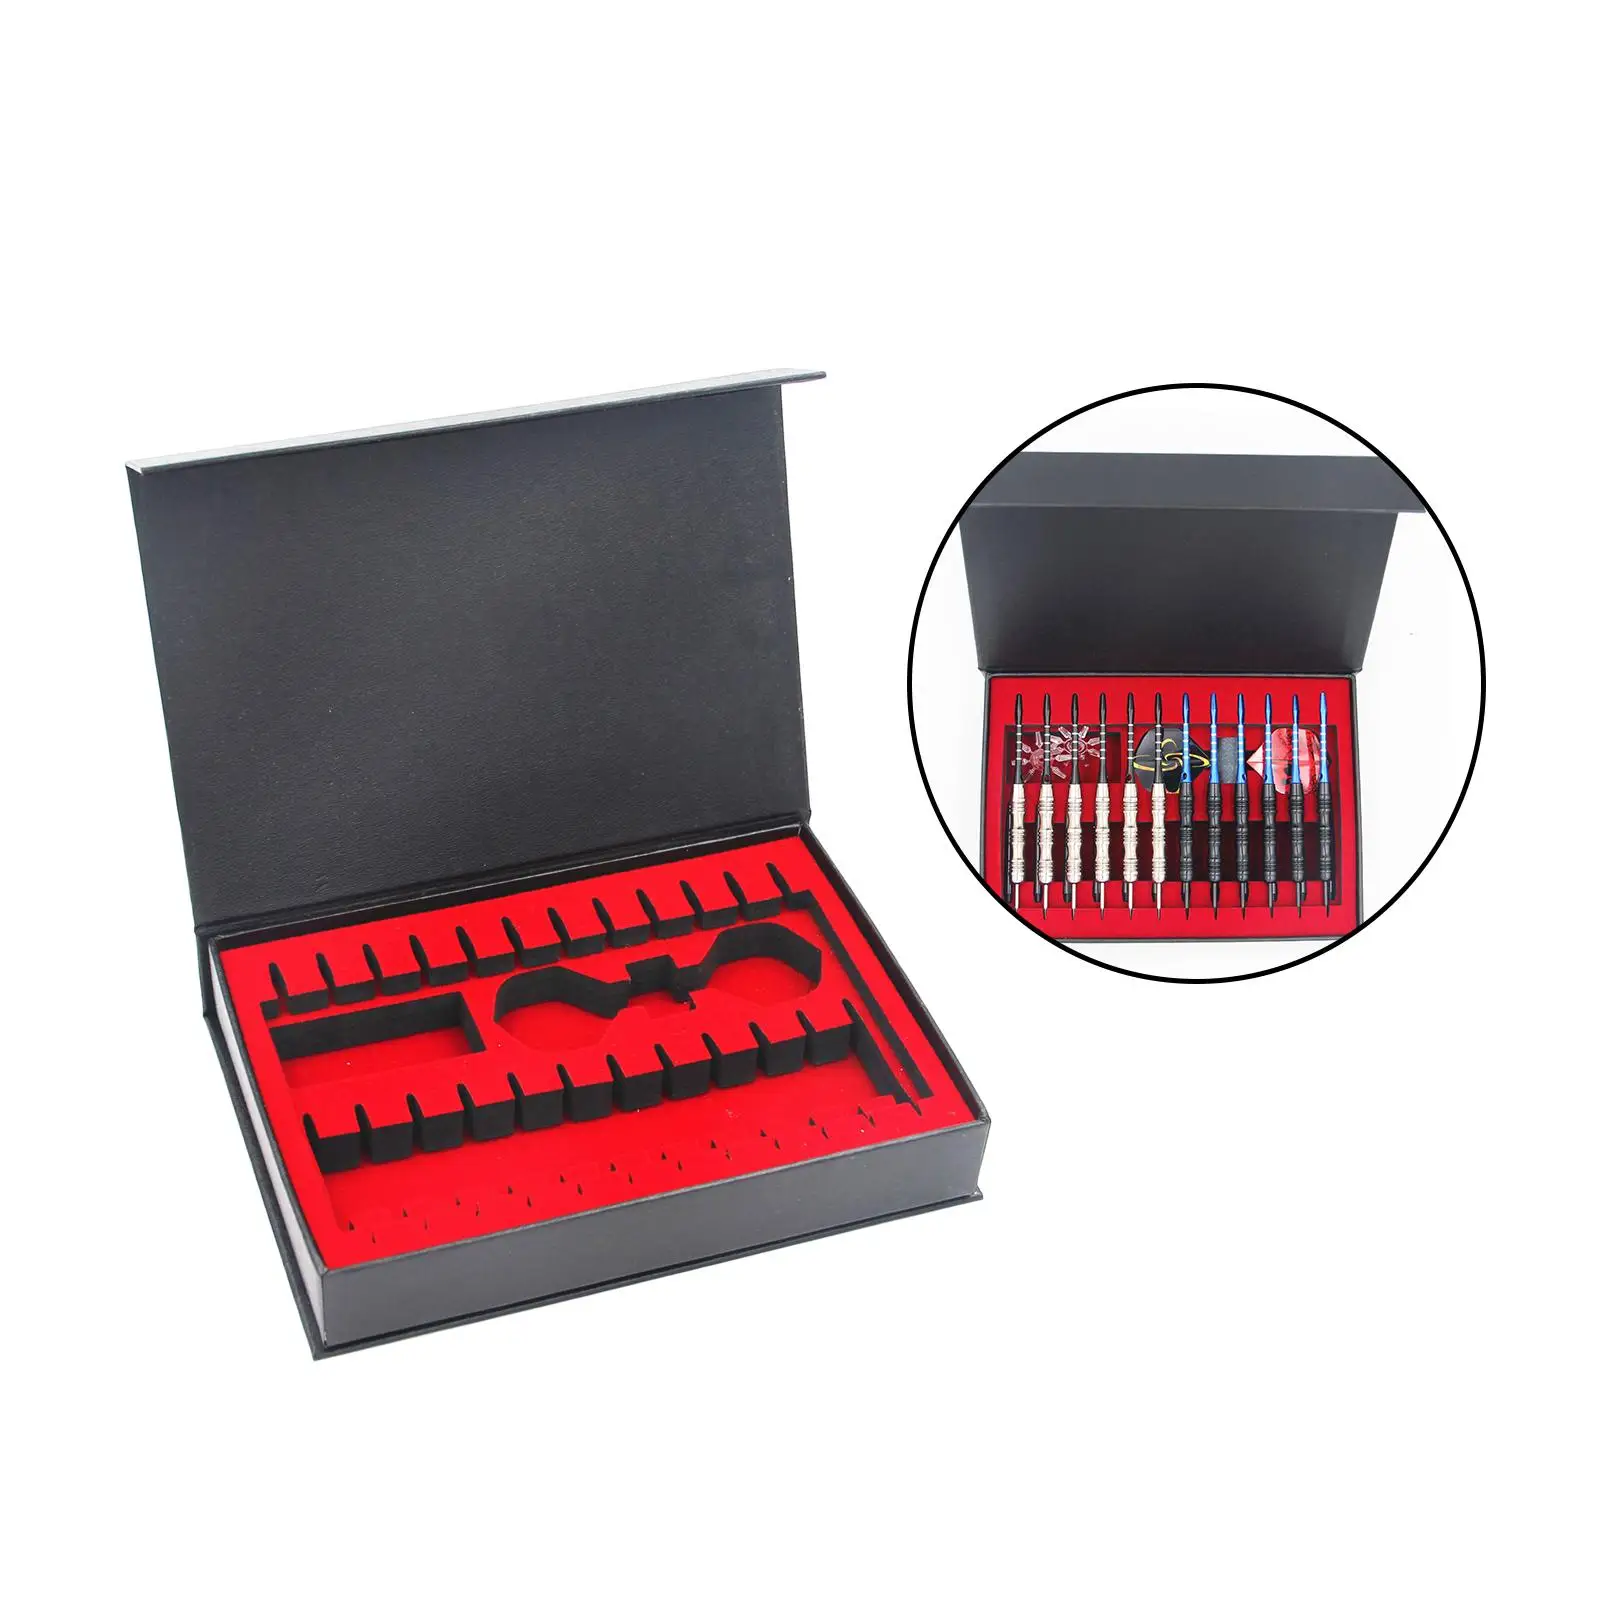 s Gift Box s Organizer Practical Professional Durable s Holder Cases Soft of Tip s for Steel Tip s Supplies